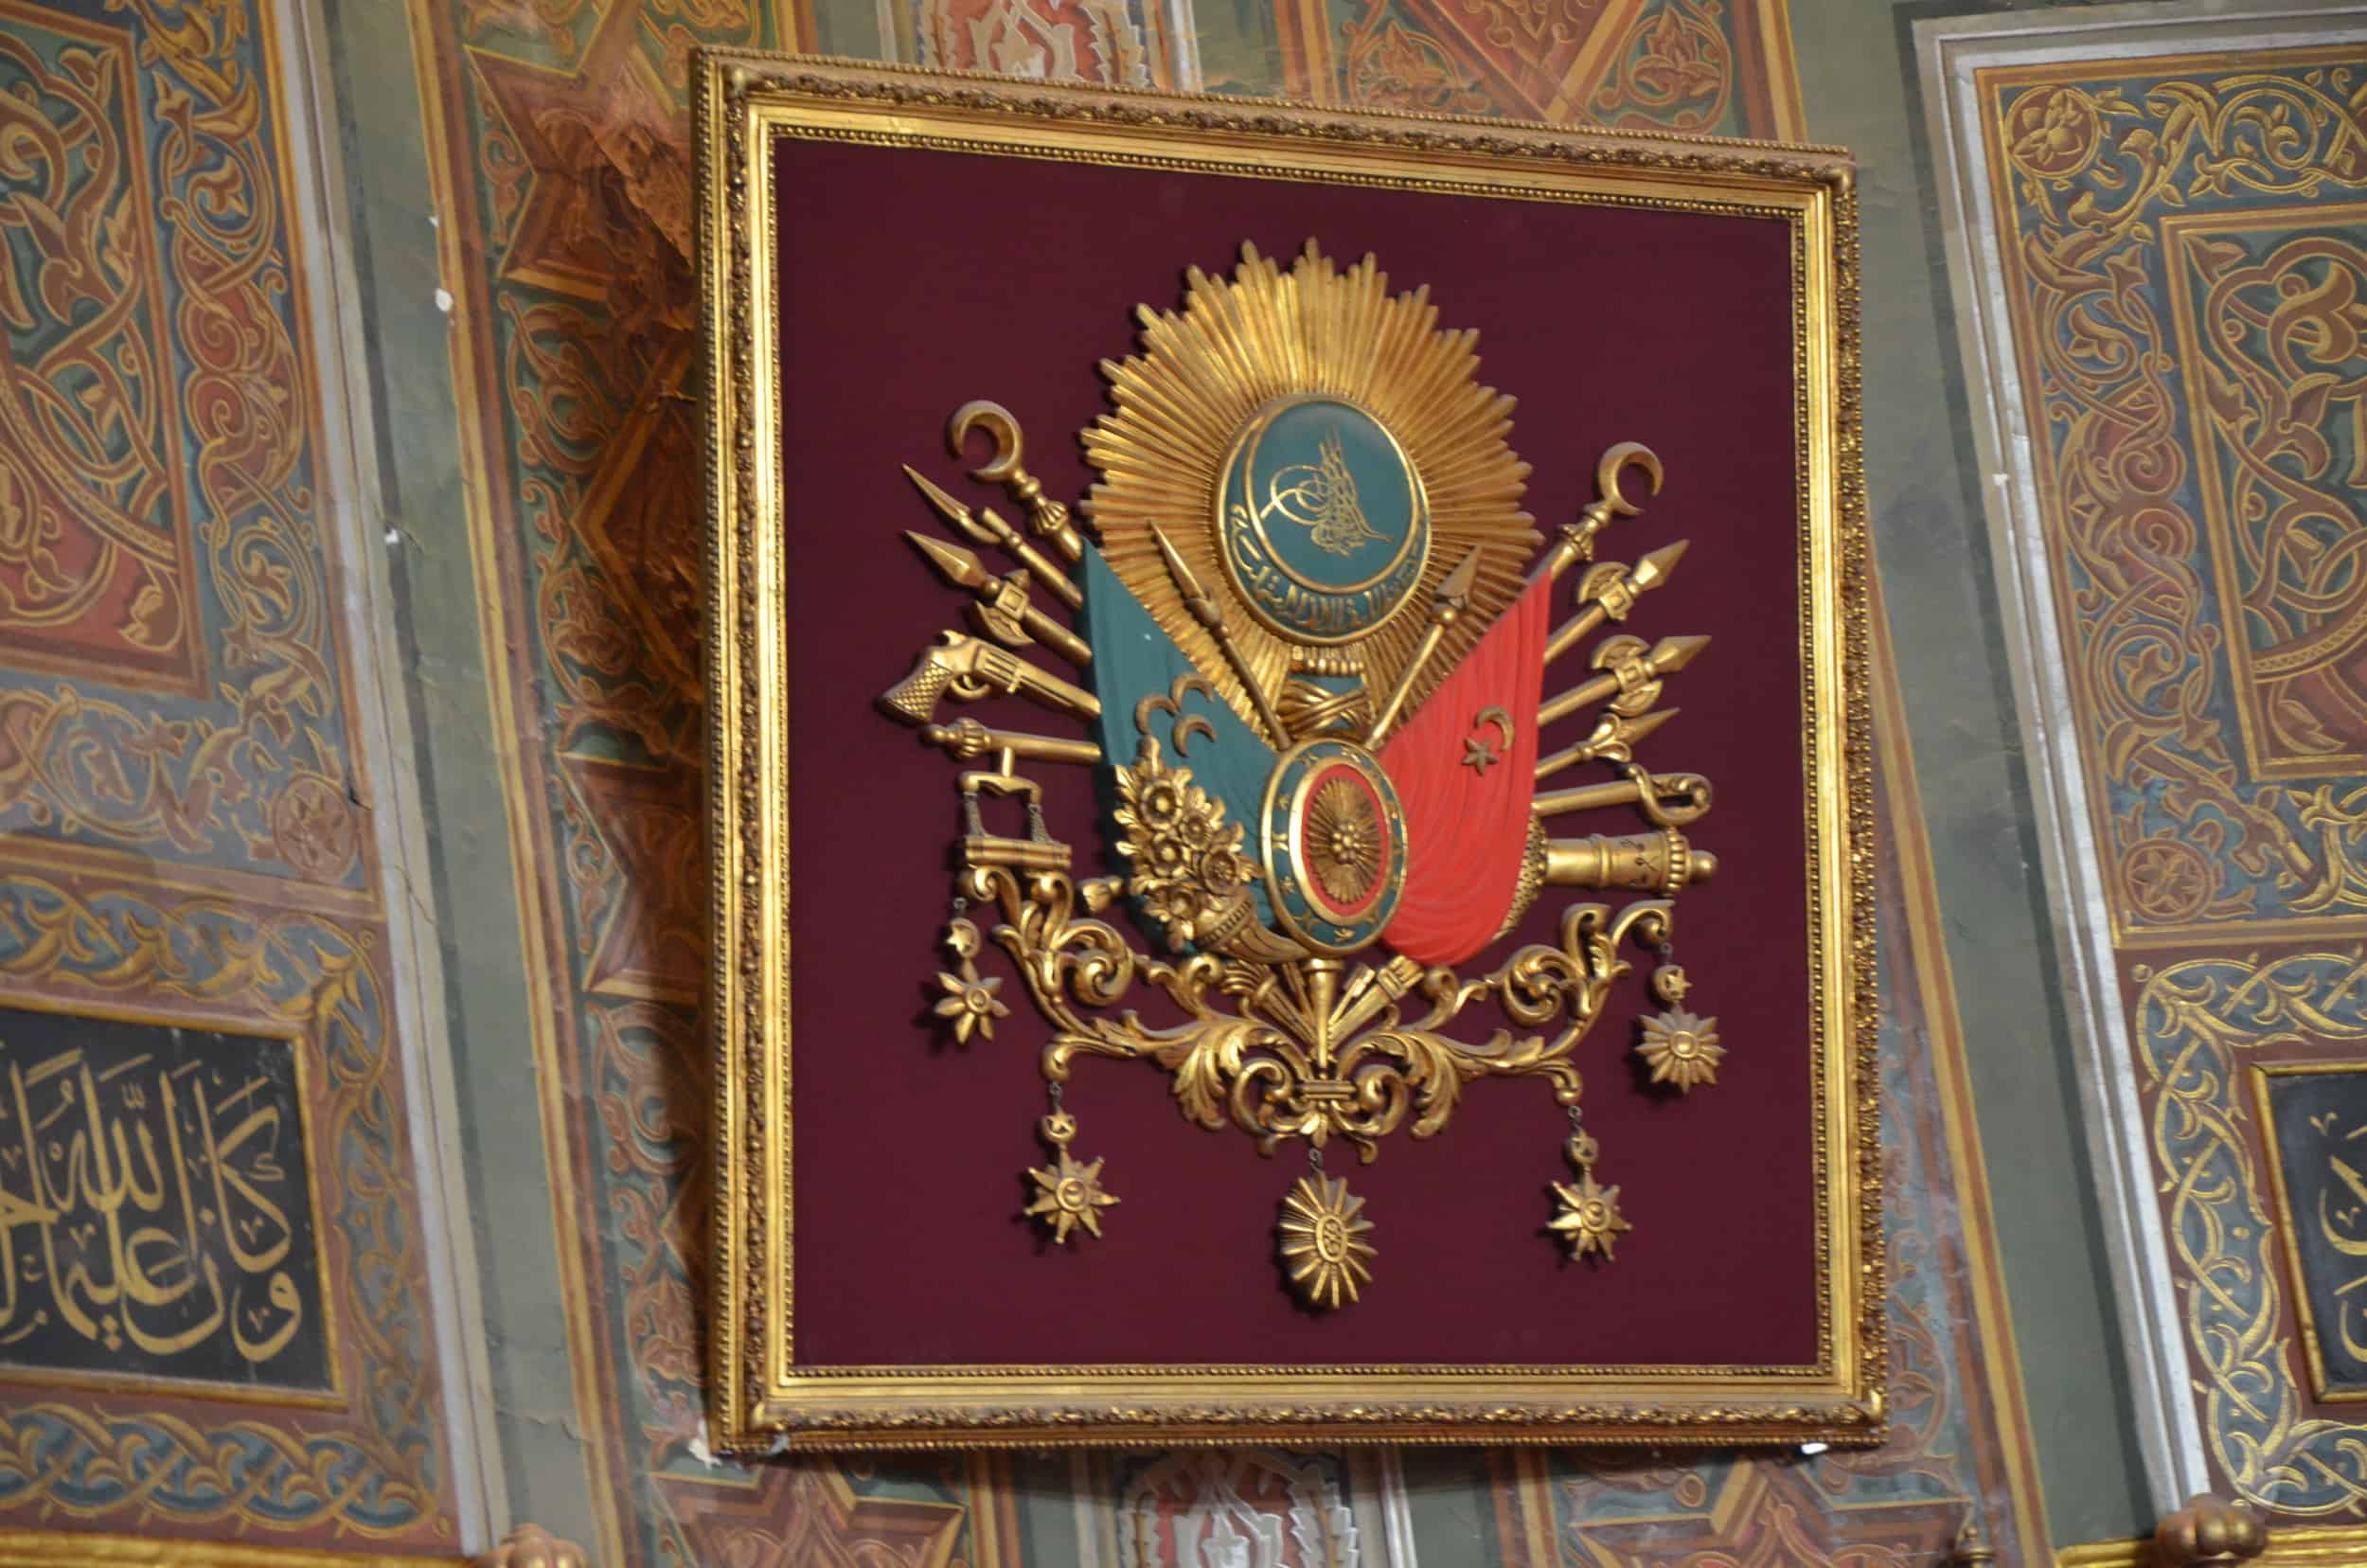 Ottoman coat of arms in the tomb of Mehmed II